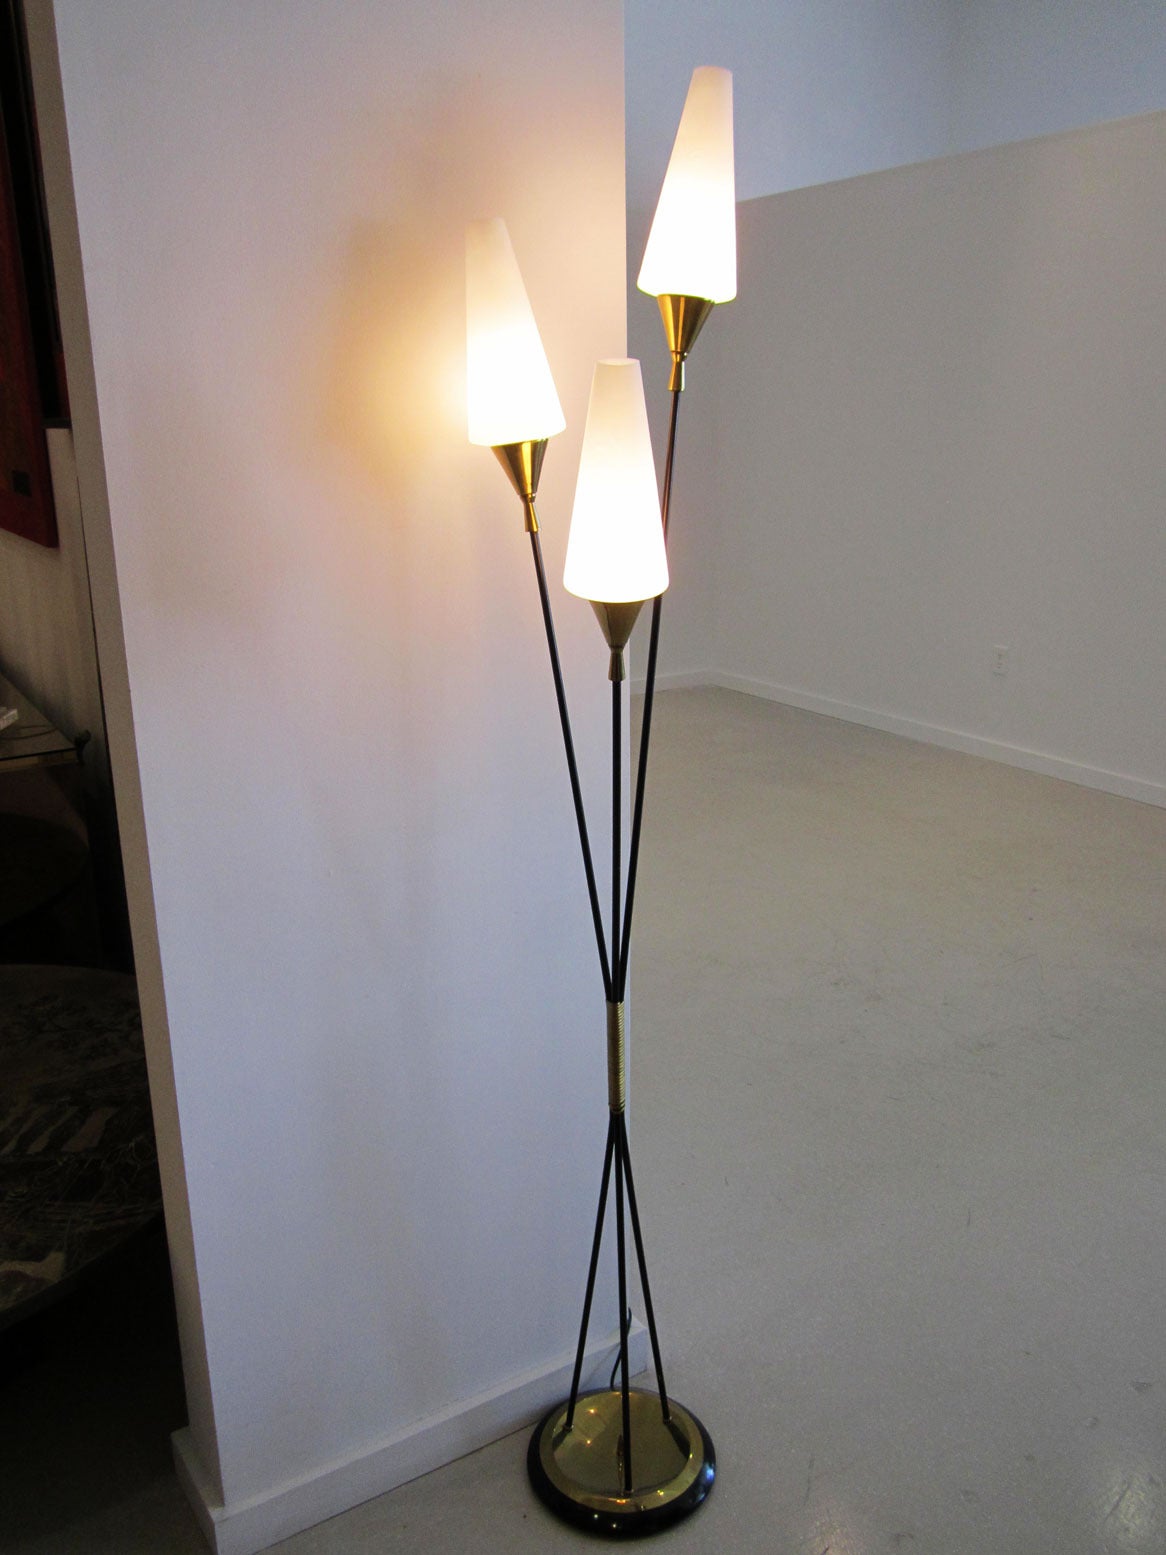 Single three socket floor lamp in the style of Stilnovo. The lamp has three black enamel rods with brass details and satin glass shades.